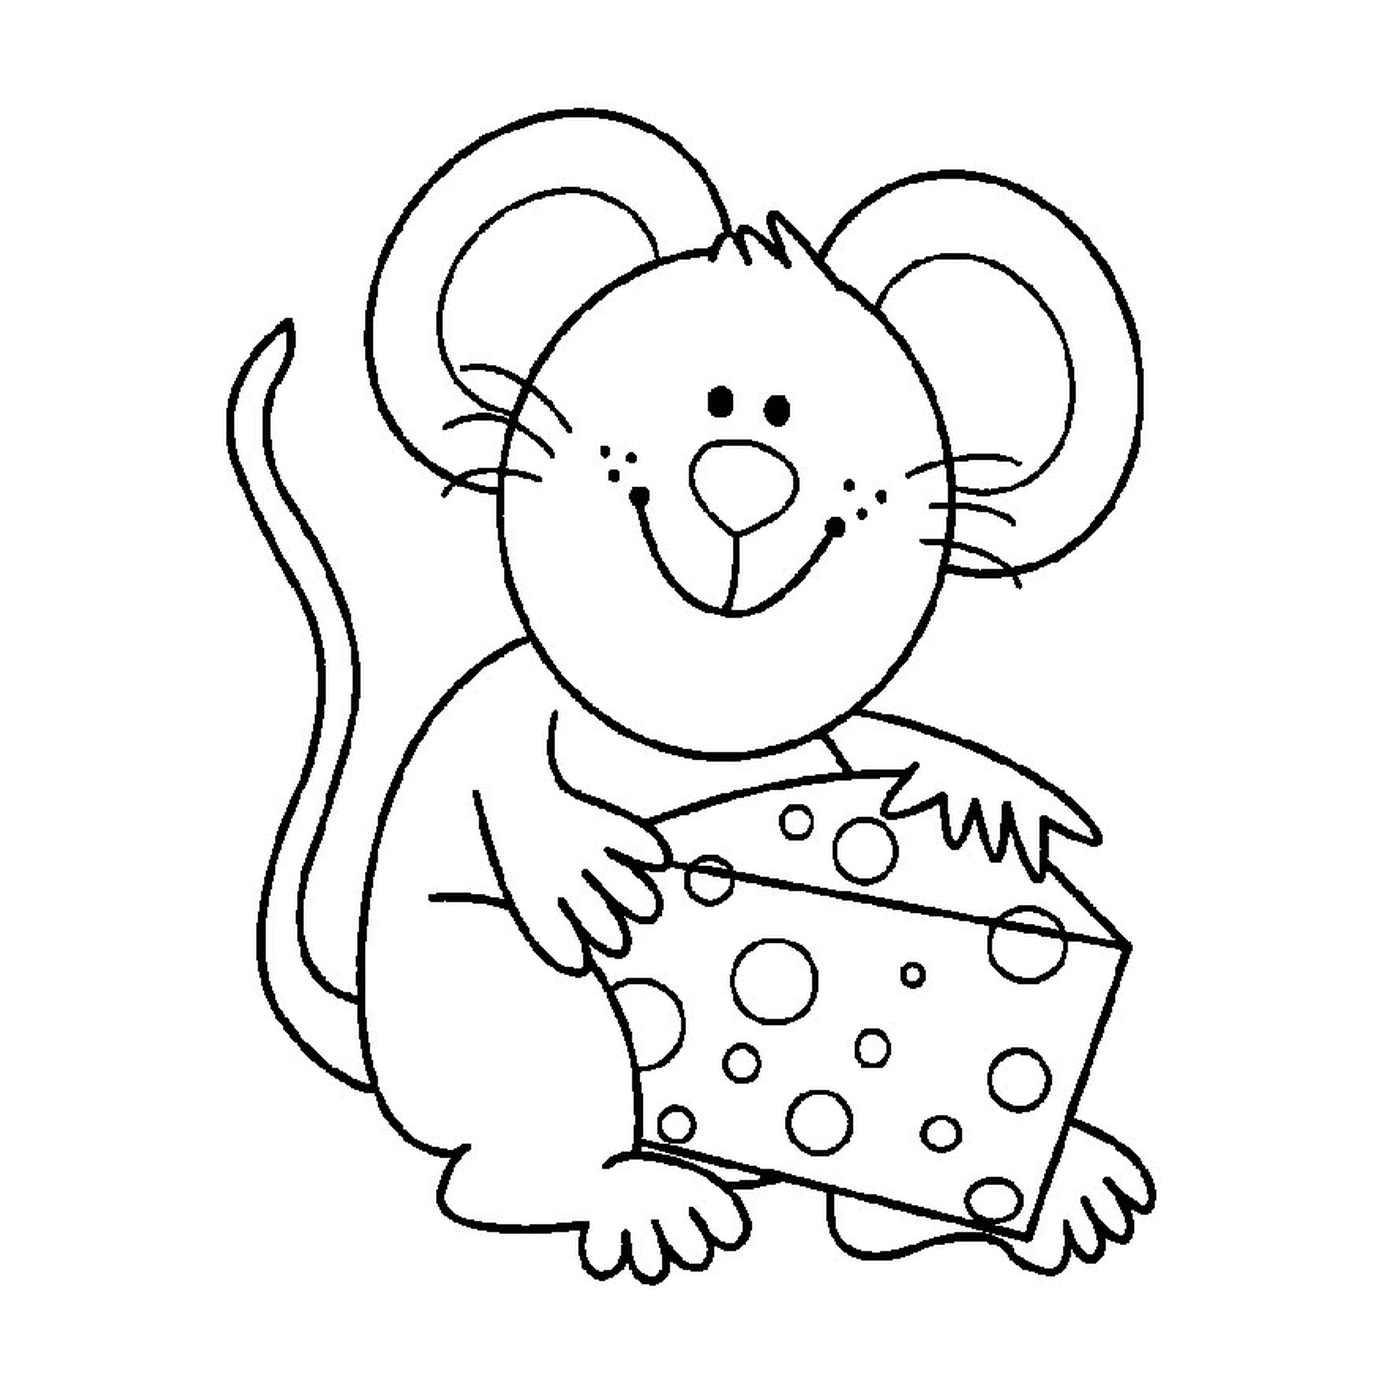  A mouse holding a piece of cheese 